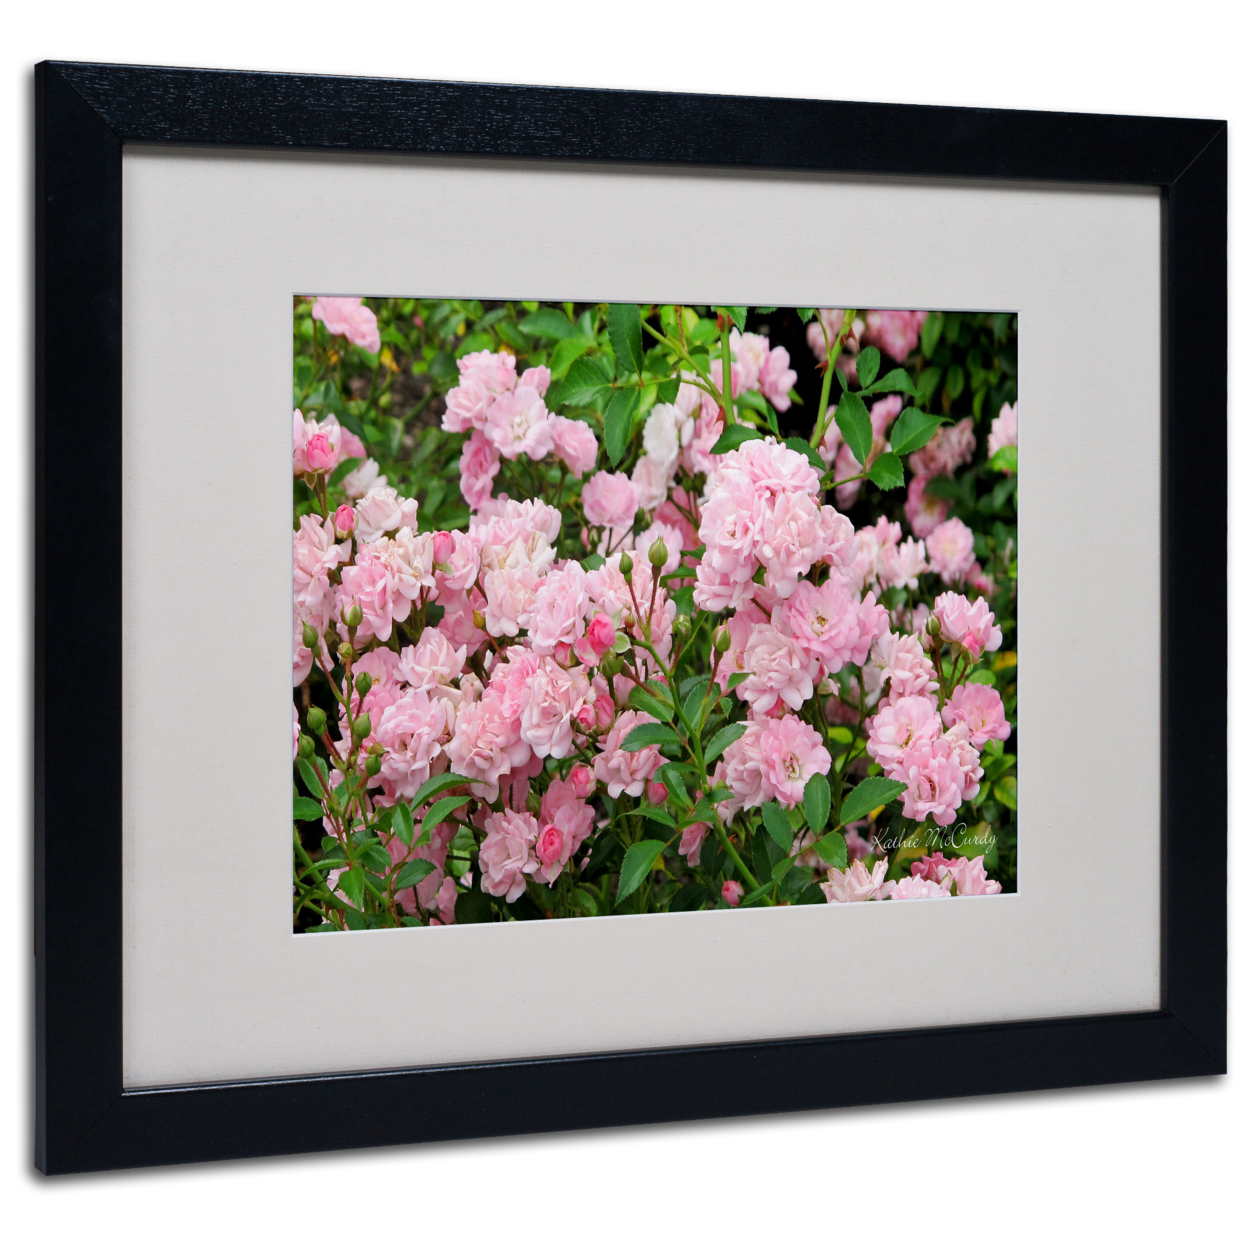 Kathie McCurdy 'Pink Roses' Black Wooden Framed Art 18 X 22 Inches